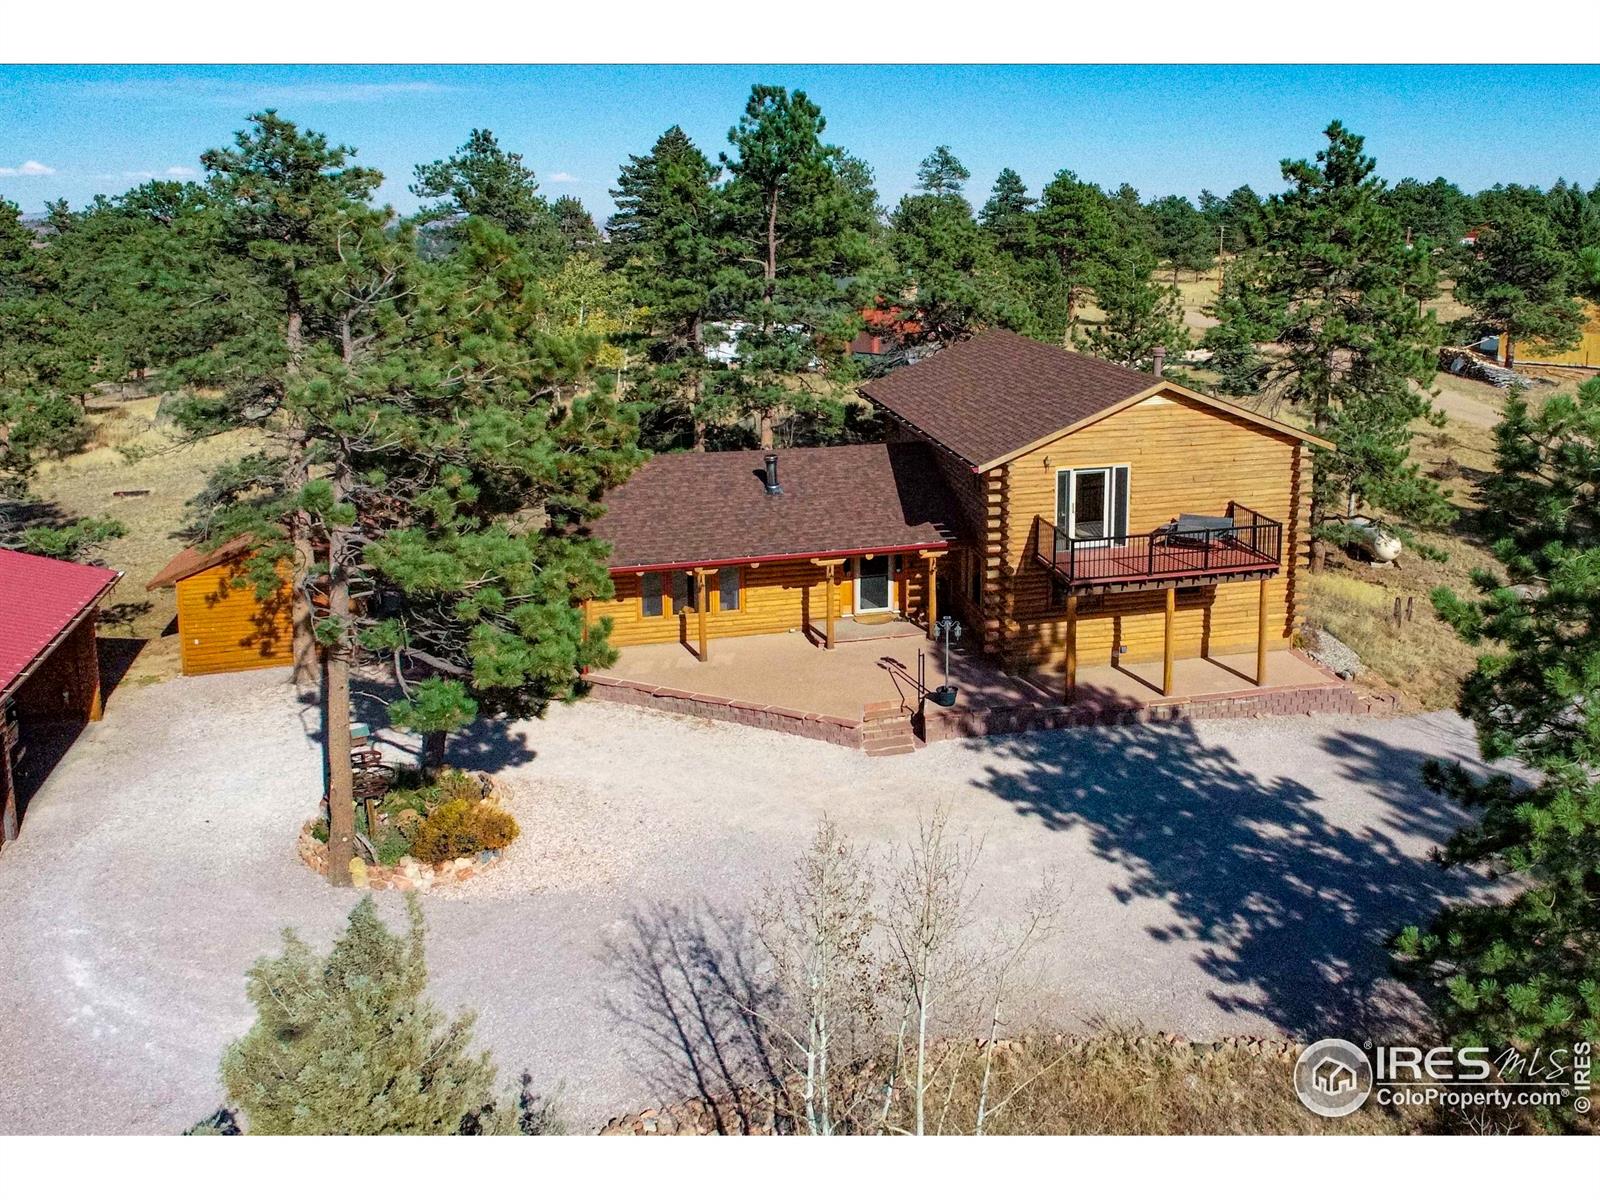 41 Mount Bross, Livermore, CO